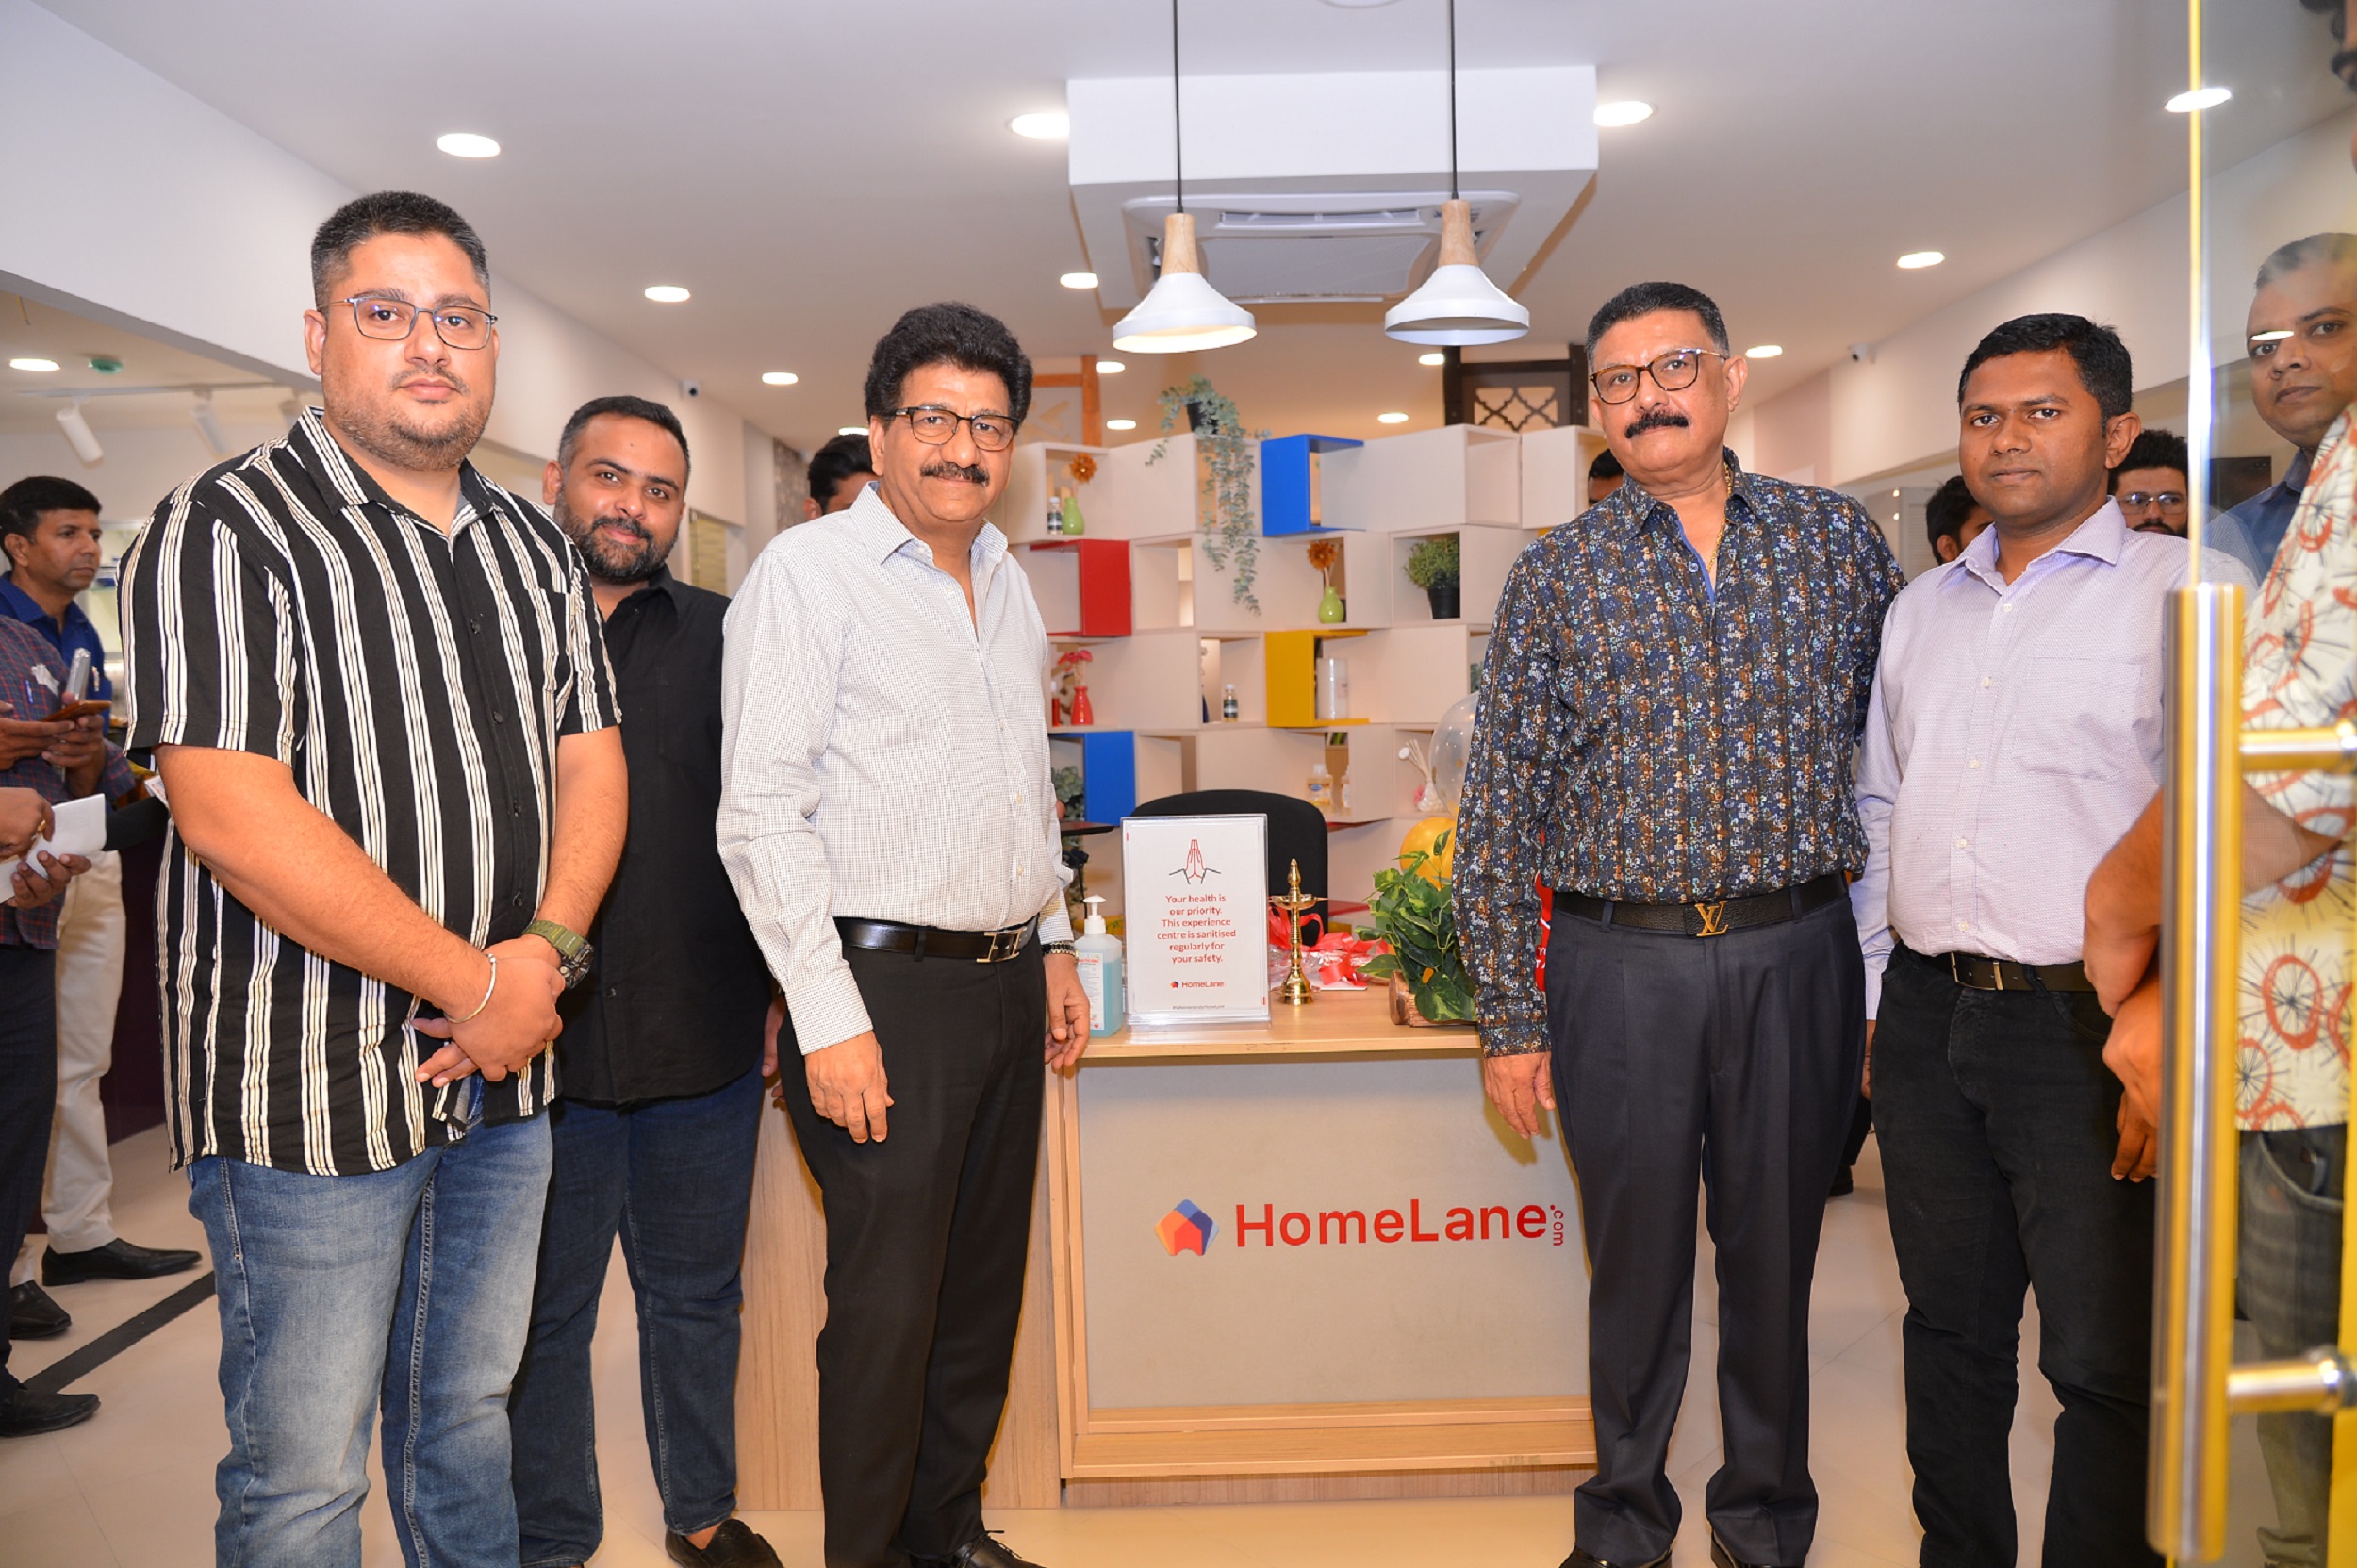 homelane-launches-its-first-studio-in-jaipur-with-the-growing-demand-for-home-interiors